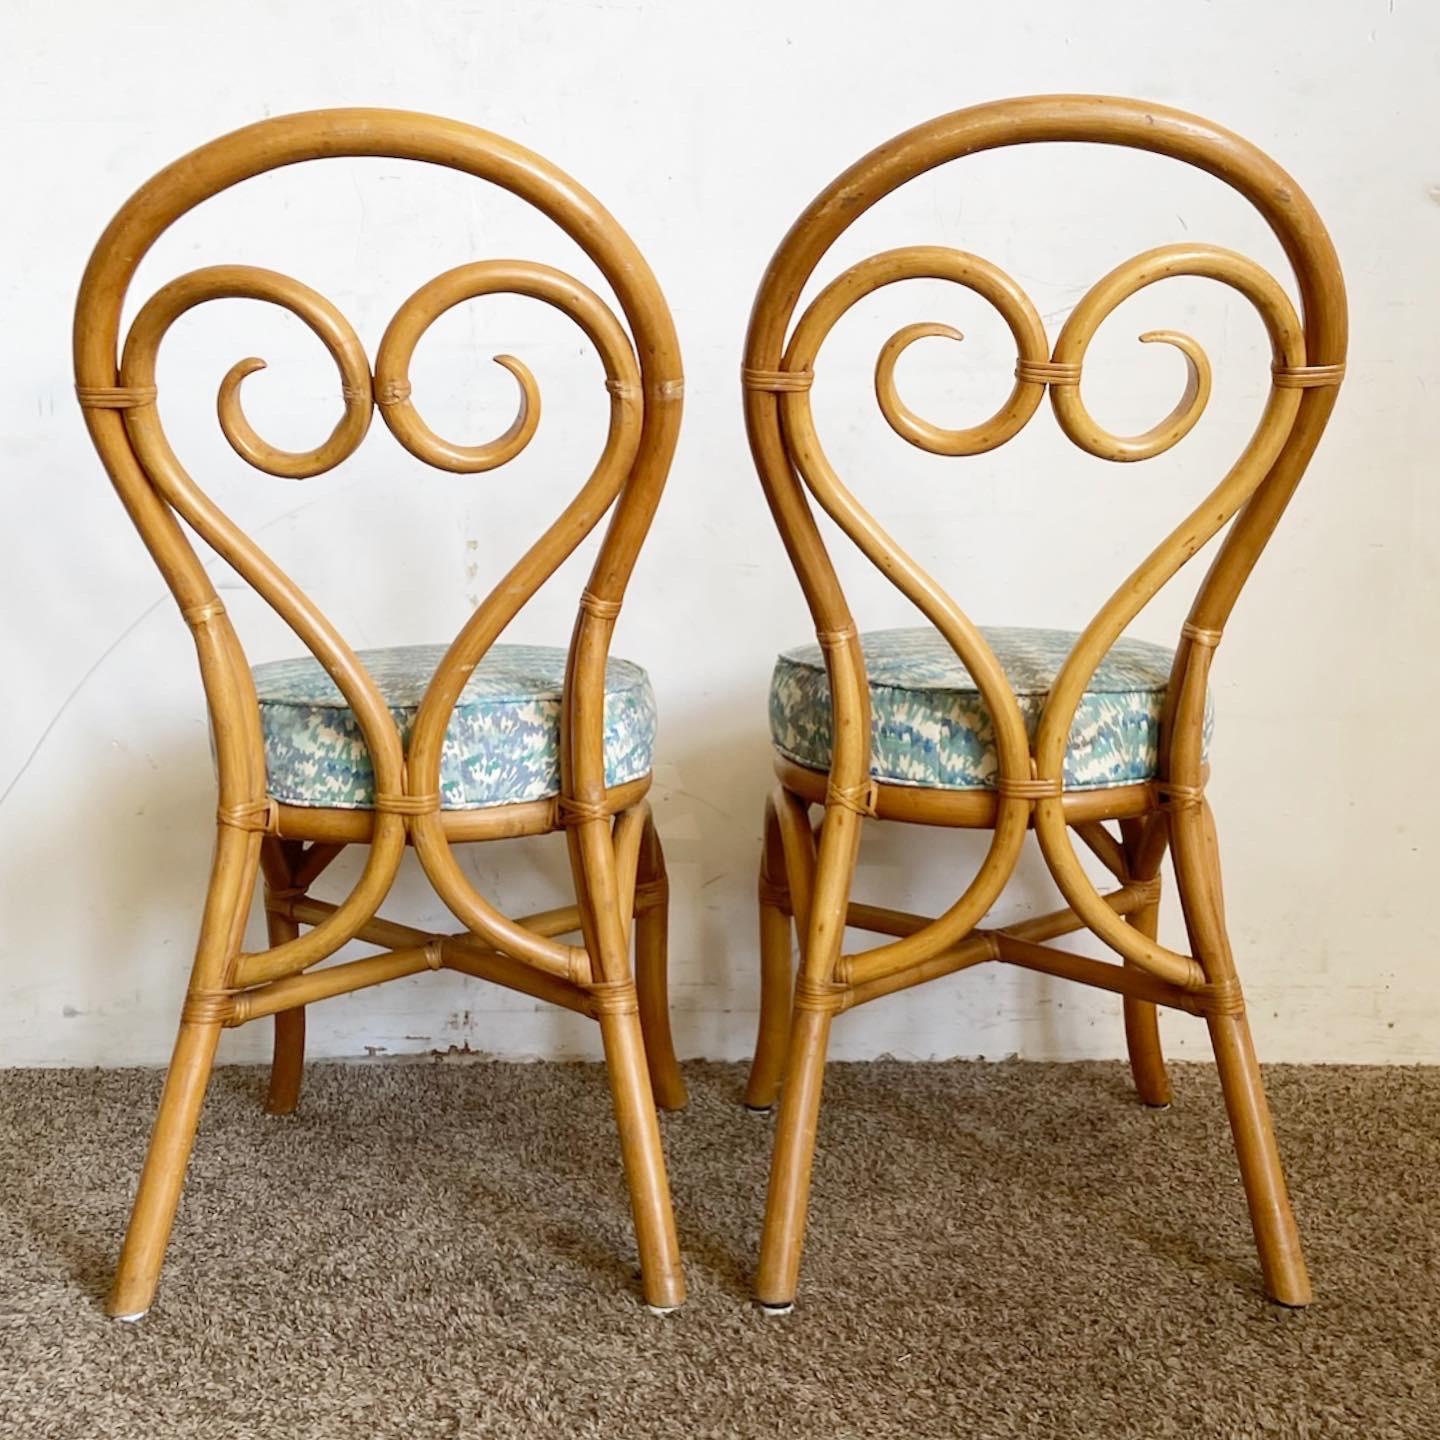 20th Century Boho Chic Bent Bamboo Rattan Heart Back Dining Chairs - Set of 4 For Sale